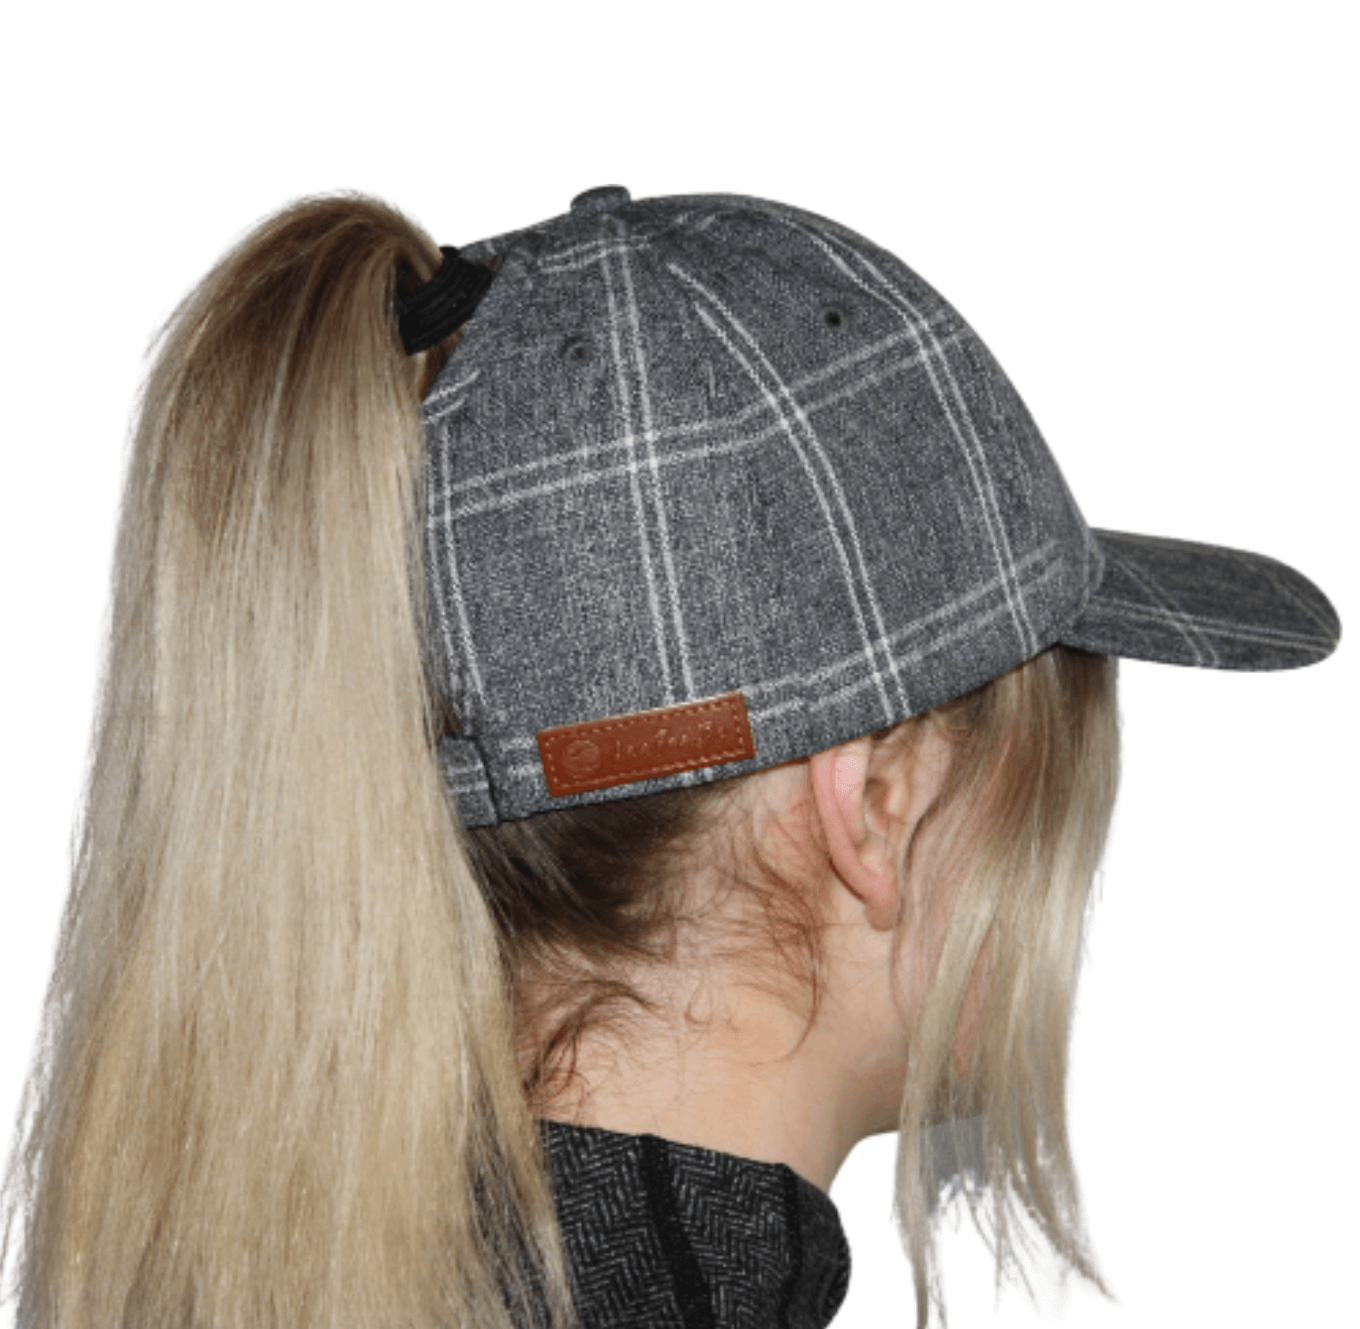 Pony Tail Golf Hat - Grey and White Plaid, Velcro Adjustable Fit